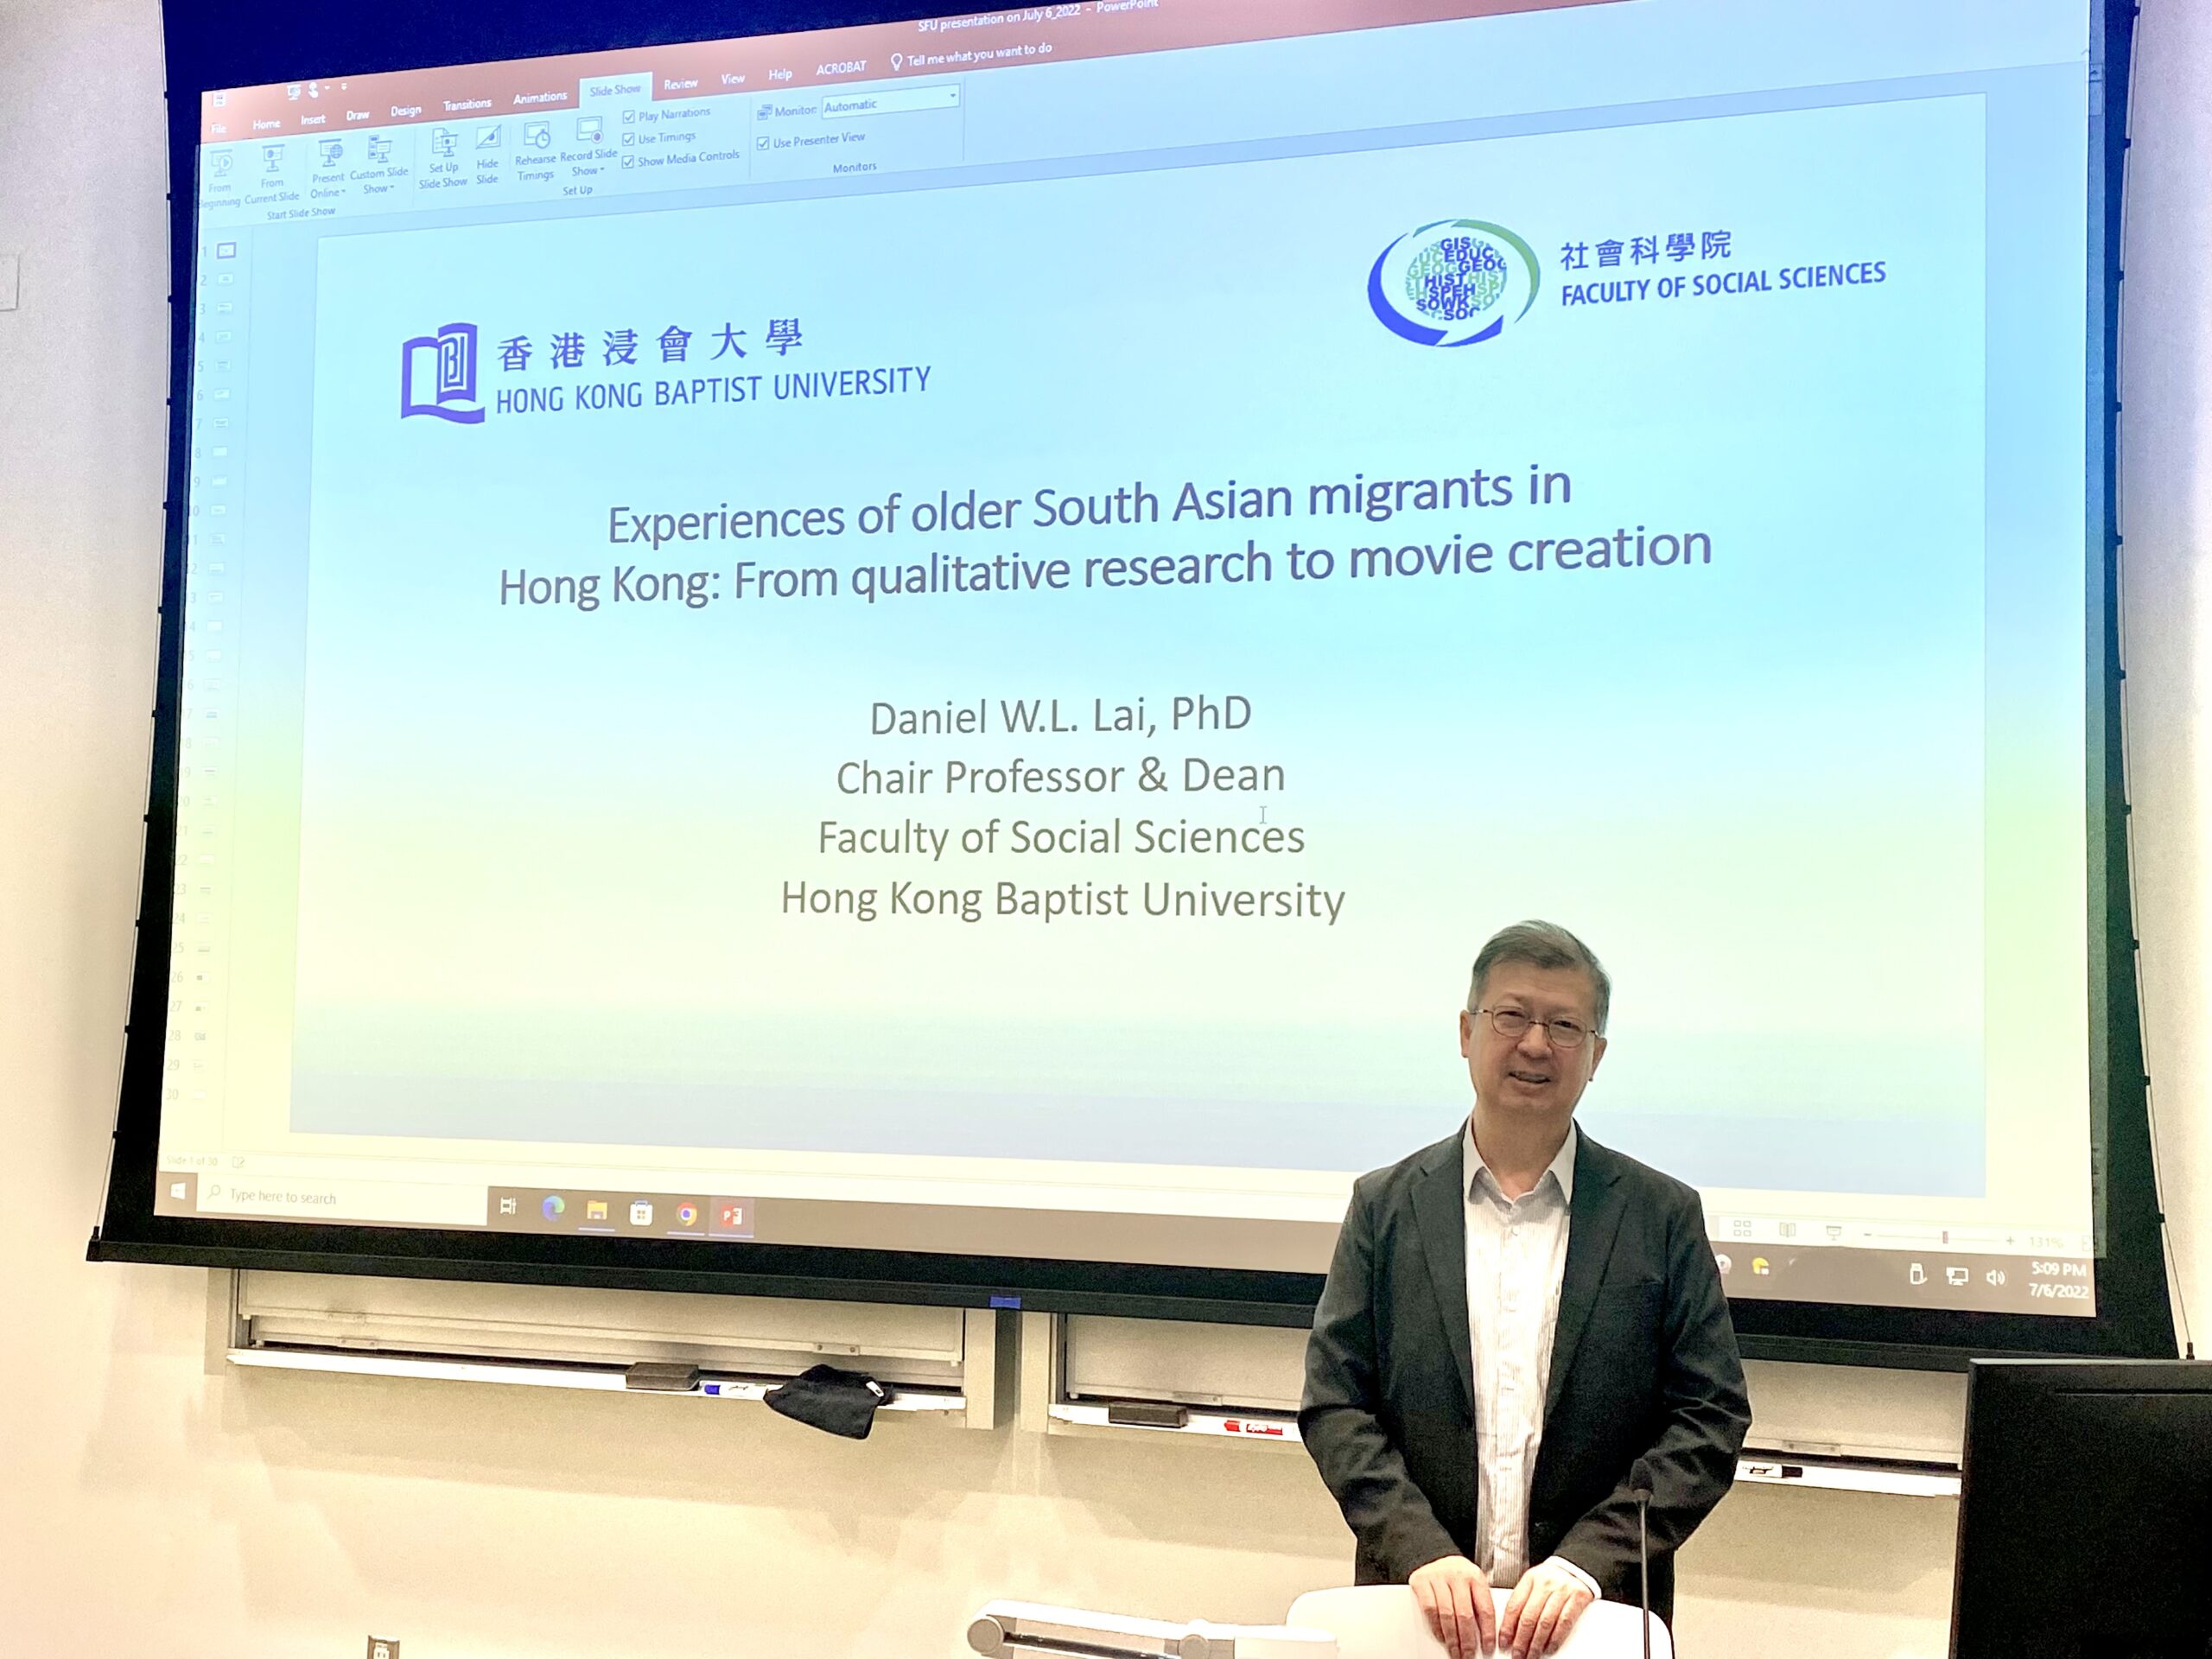 Professor Lai is standing in front of a projector screen that reads: Experiences of older South Asain migrants in Hong Kong: From qualitative research to movie creation. He is looking at the camera smiling.